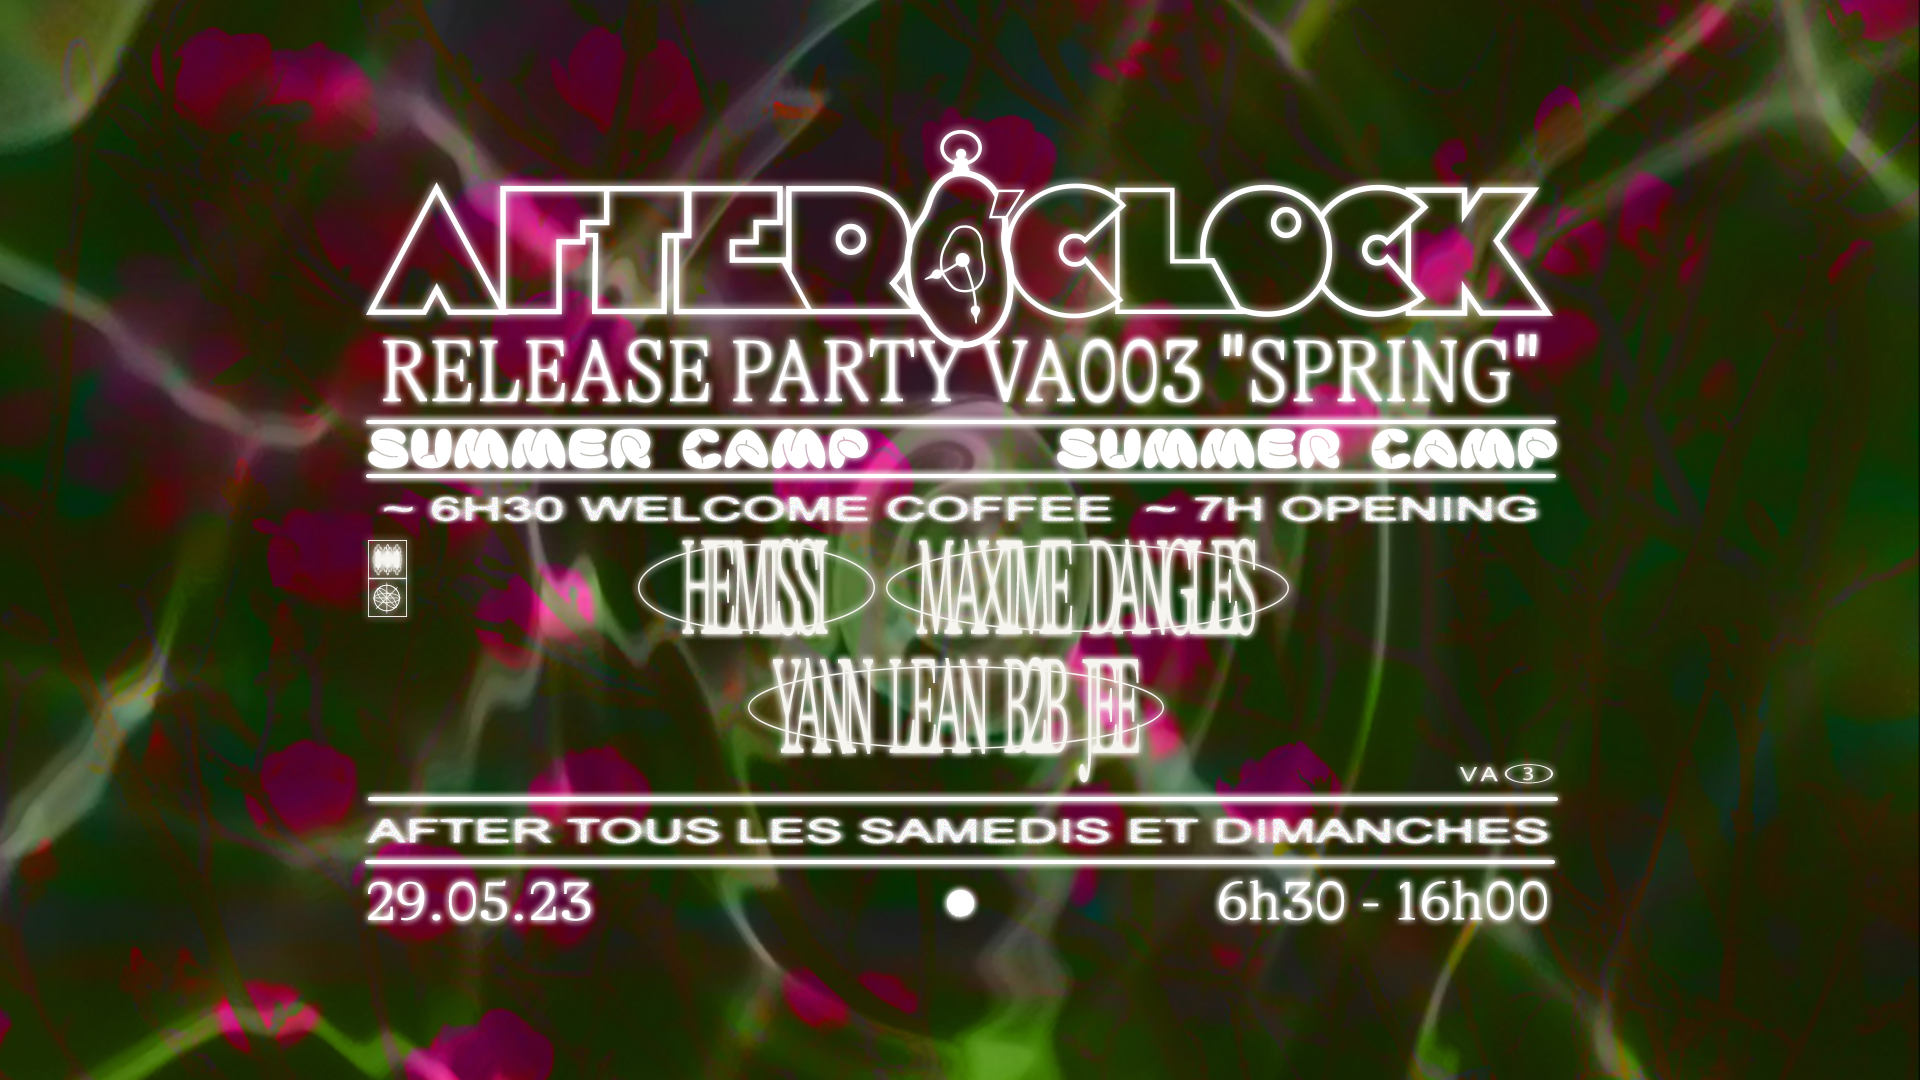 After O'Clock: Release party 'SPRING' avec Hemissi, Maxime Dangles, Yann Lean B2B Jee - フライヤー表